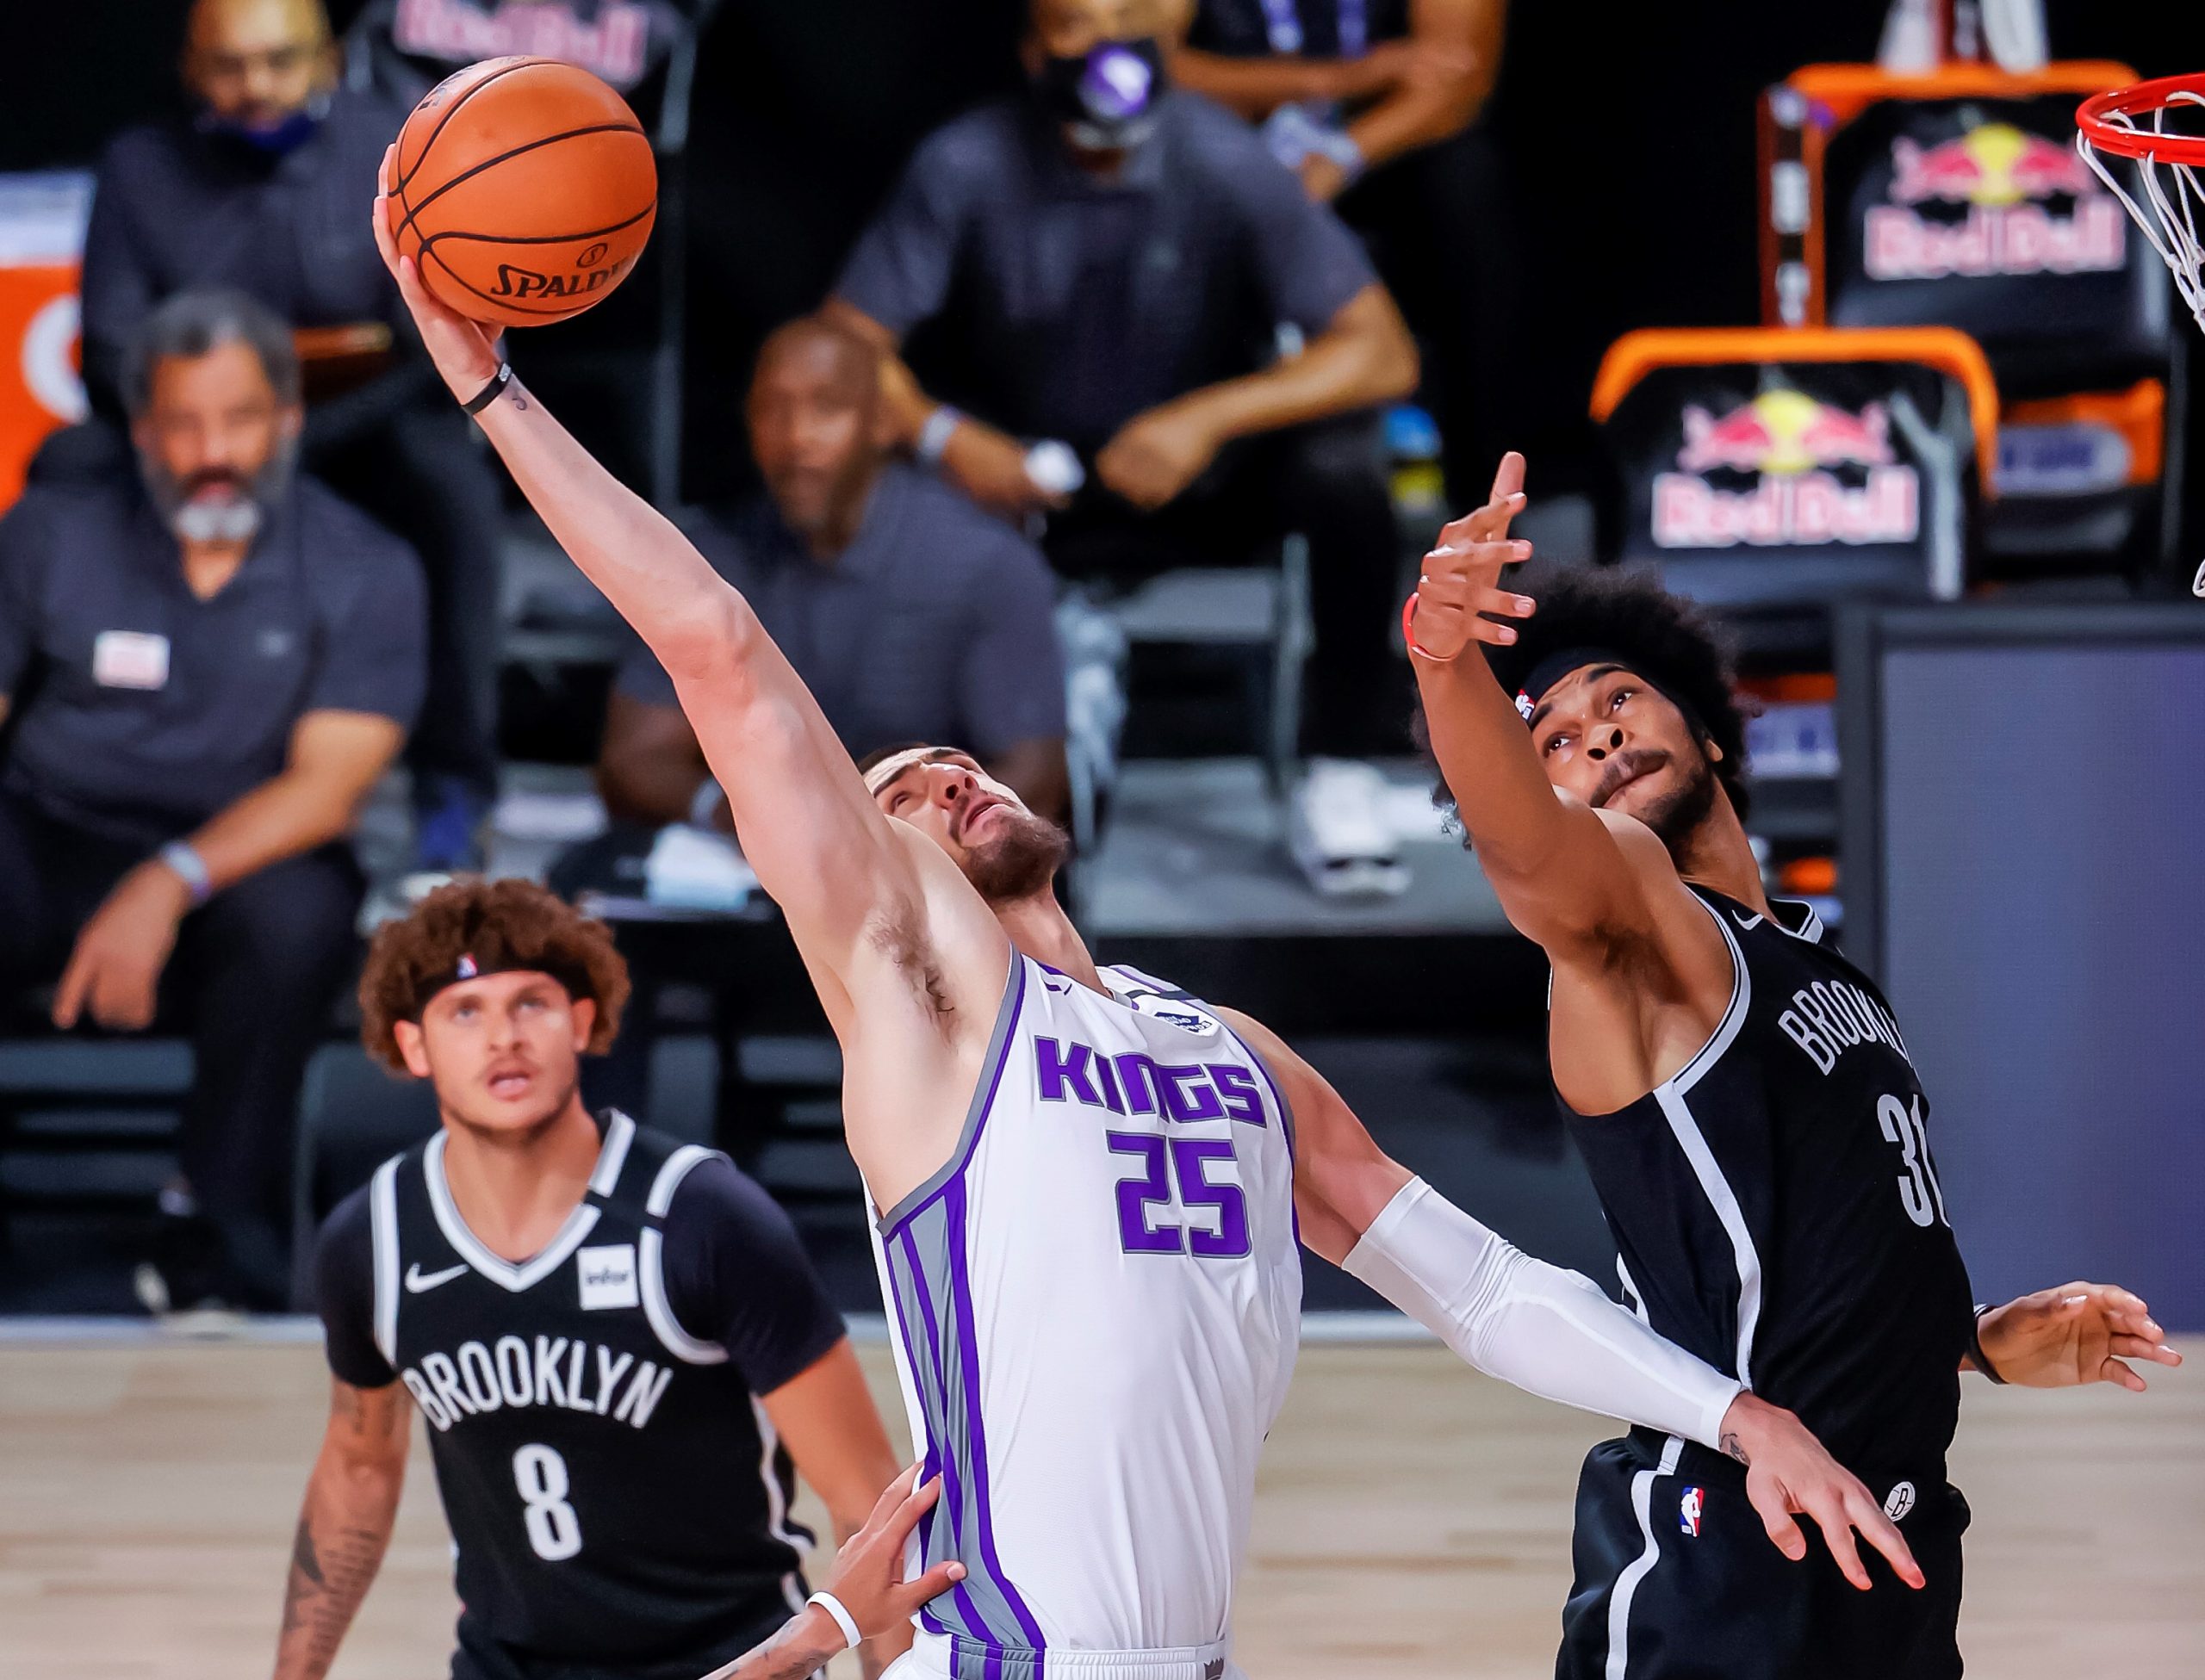 epa08590757 Sacramento Kings center Alex Len (L) of Ukraine in action against Brooklyn Nets center Jarrett Allen (R) during the first quarter of the NBA basketball game between the Sacramento Kings and the Brooklyn Nets at the ESPN Wide World of Sports Complex in Kissimmee, Florida, USA, 07 August 2020. The NBA season has restarted at the Walt Disney World sports complex outside Orlando, Florida.  EPA/ERIK S. LESSER SHUTTERSTOCK OUT